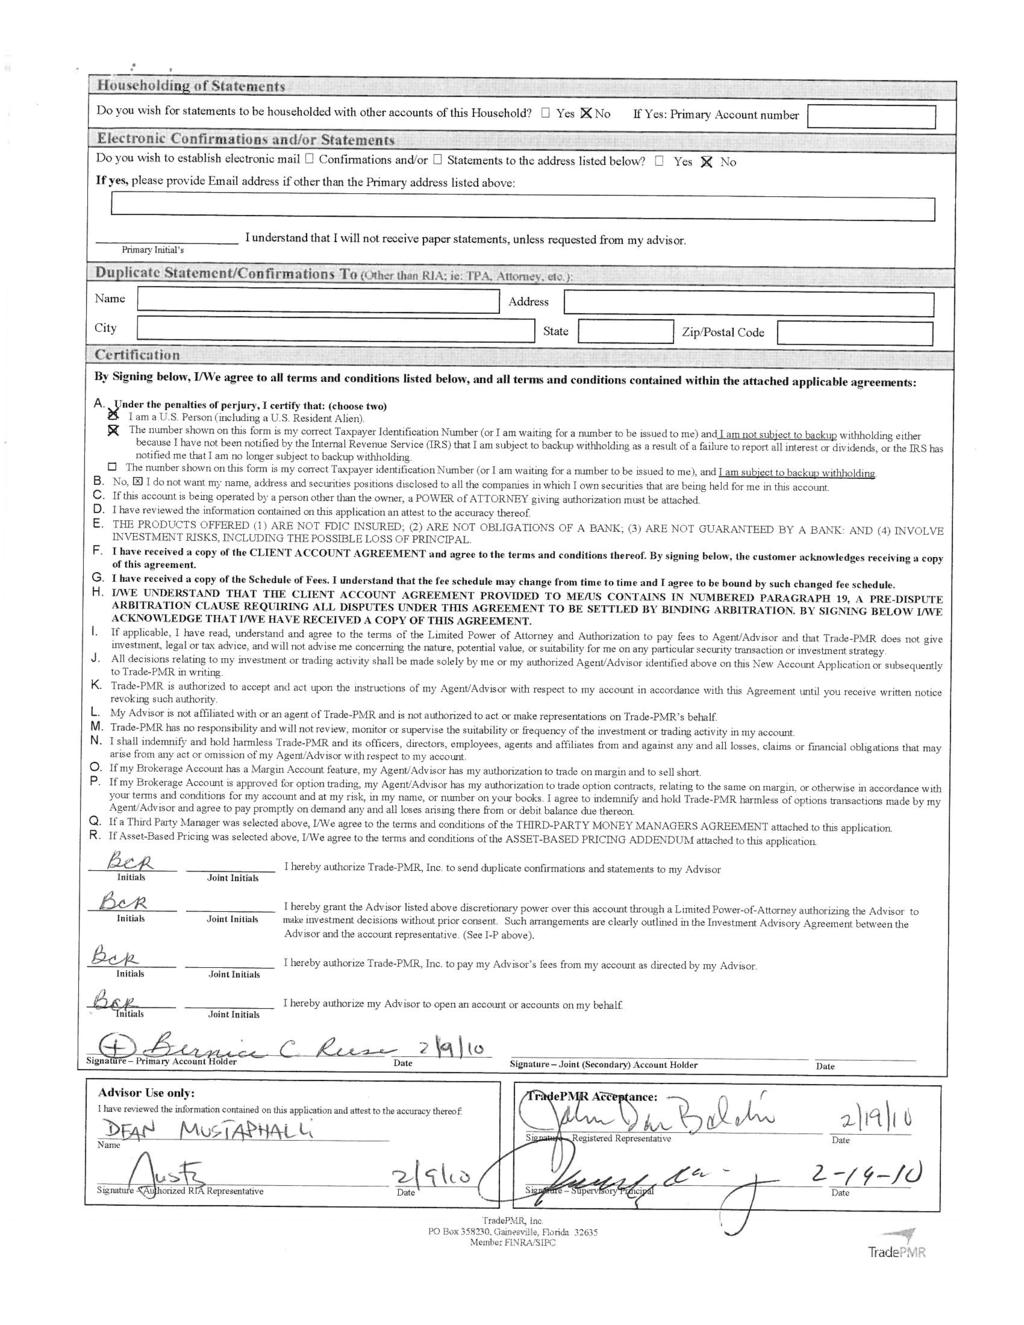 FILED: NEW YORK COUNTY CLERK 08/11/2017 06:56 PM NYSCEF DOC. NO.